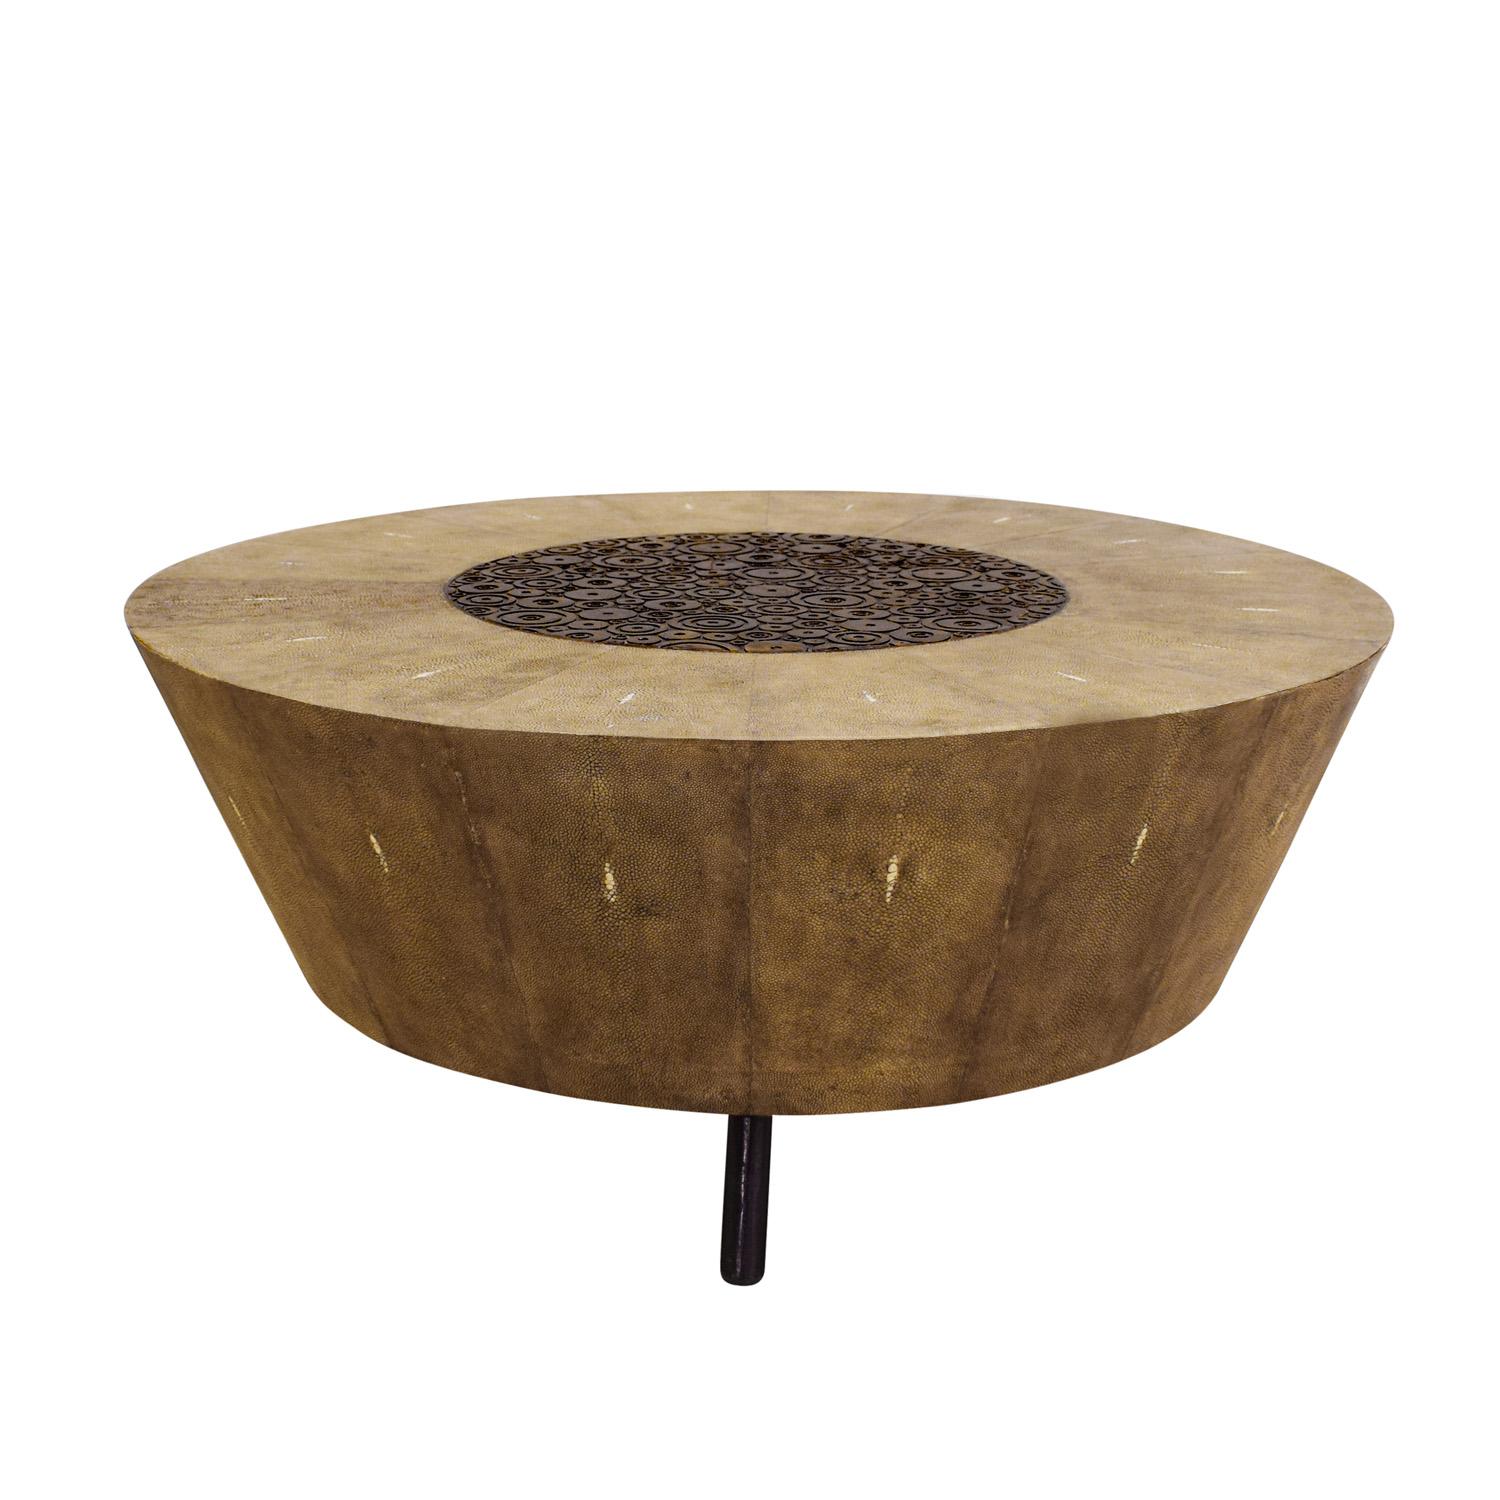 Round coffee table in taupe shagreen with steel legs and bronze center on top with circular motif by R & Y Augousti, France 2010 (signed “R&Y Augousti Paris” on brass label on bottom). A beautiful combination of materials.